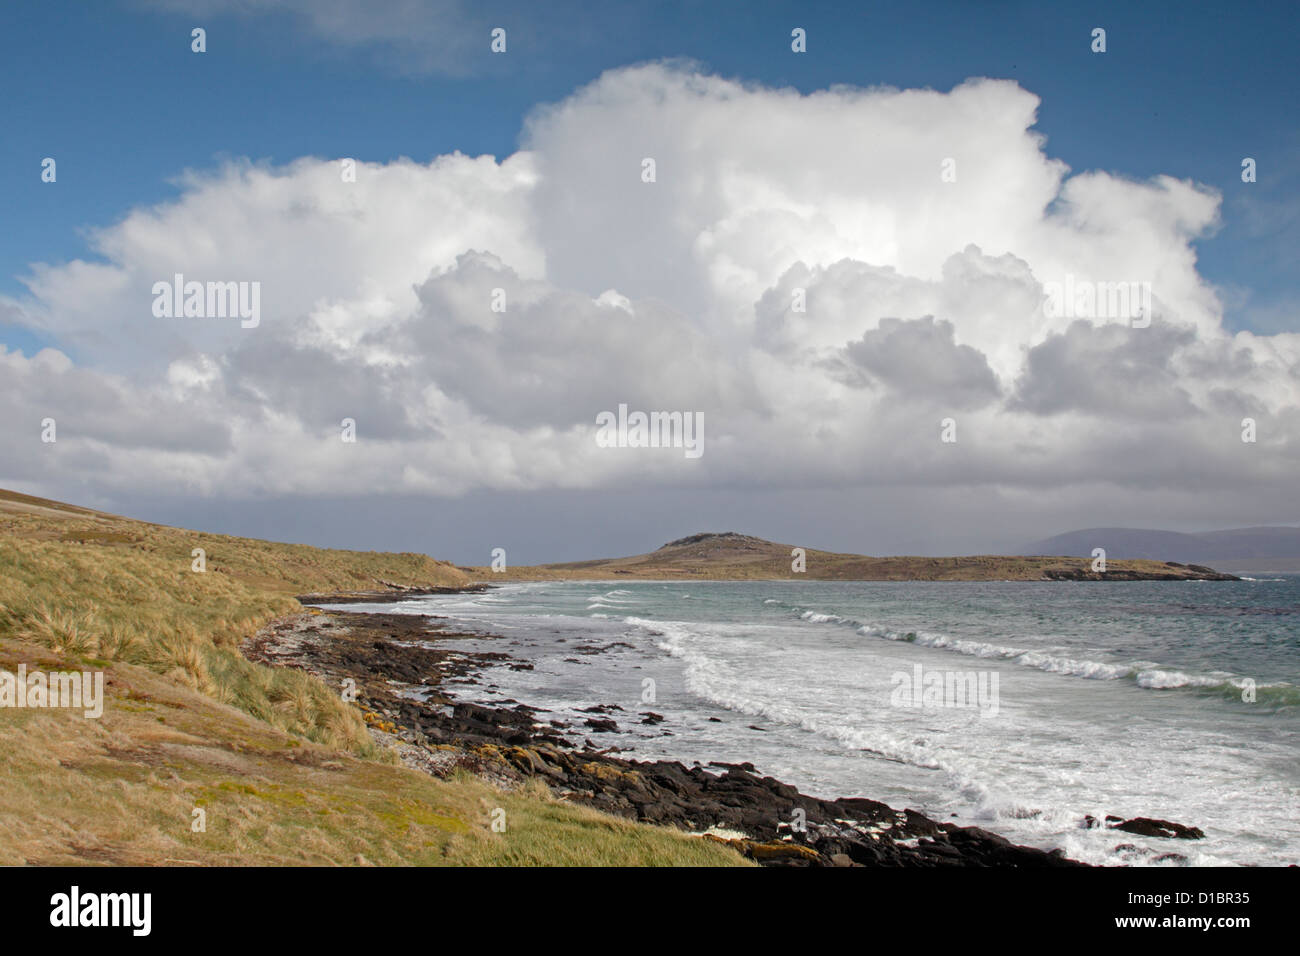 View on Carcass Island towards Leopard beach with cumulus clouds Stock Photo